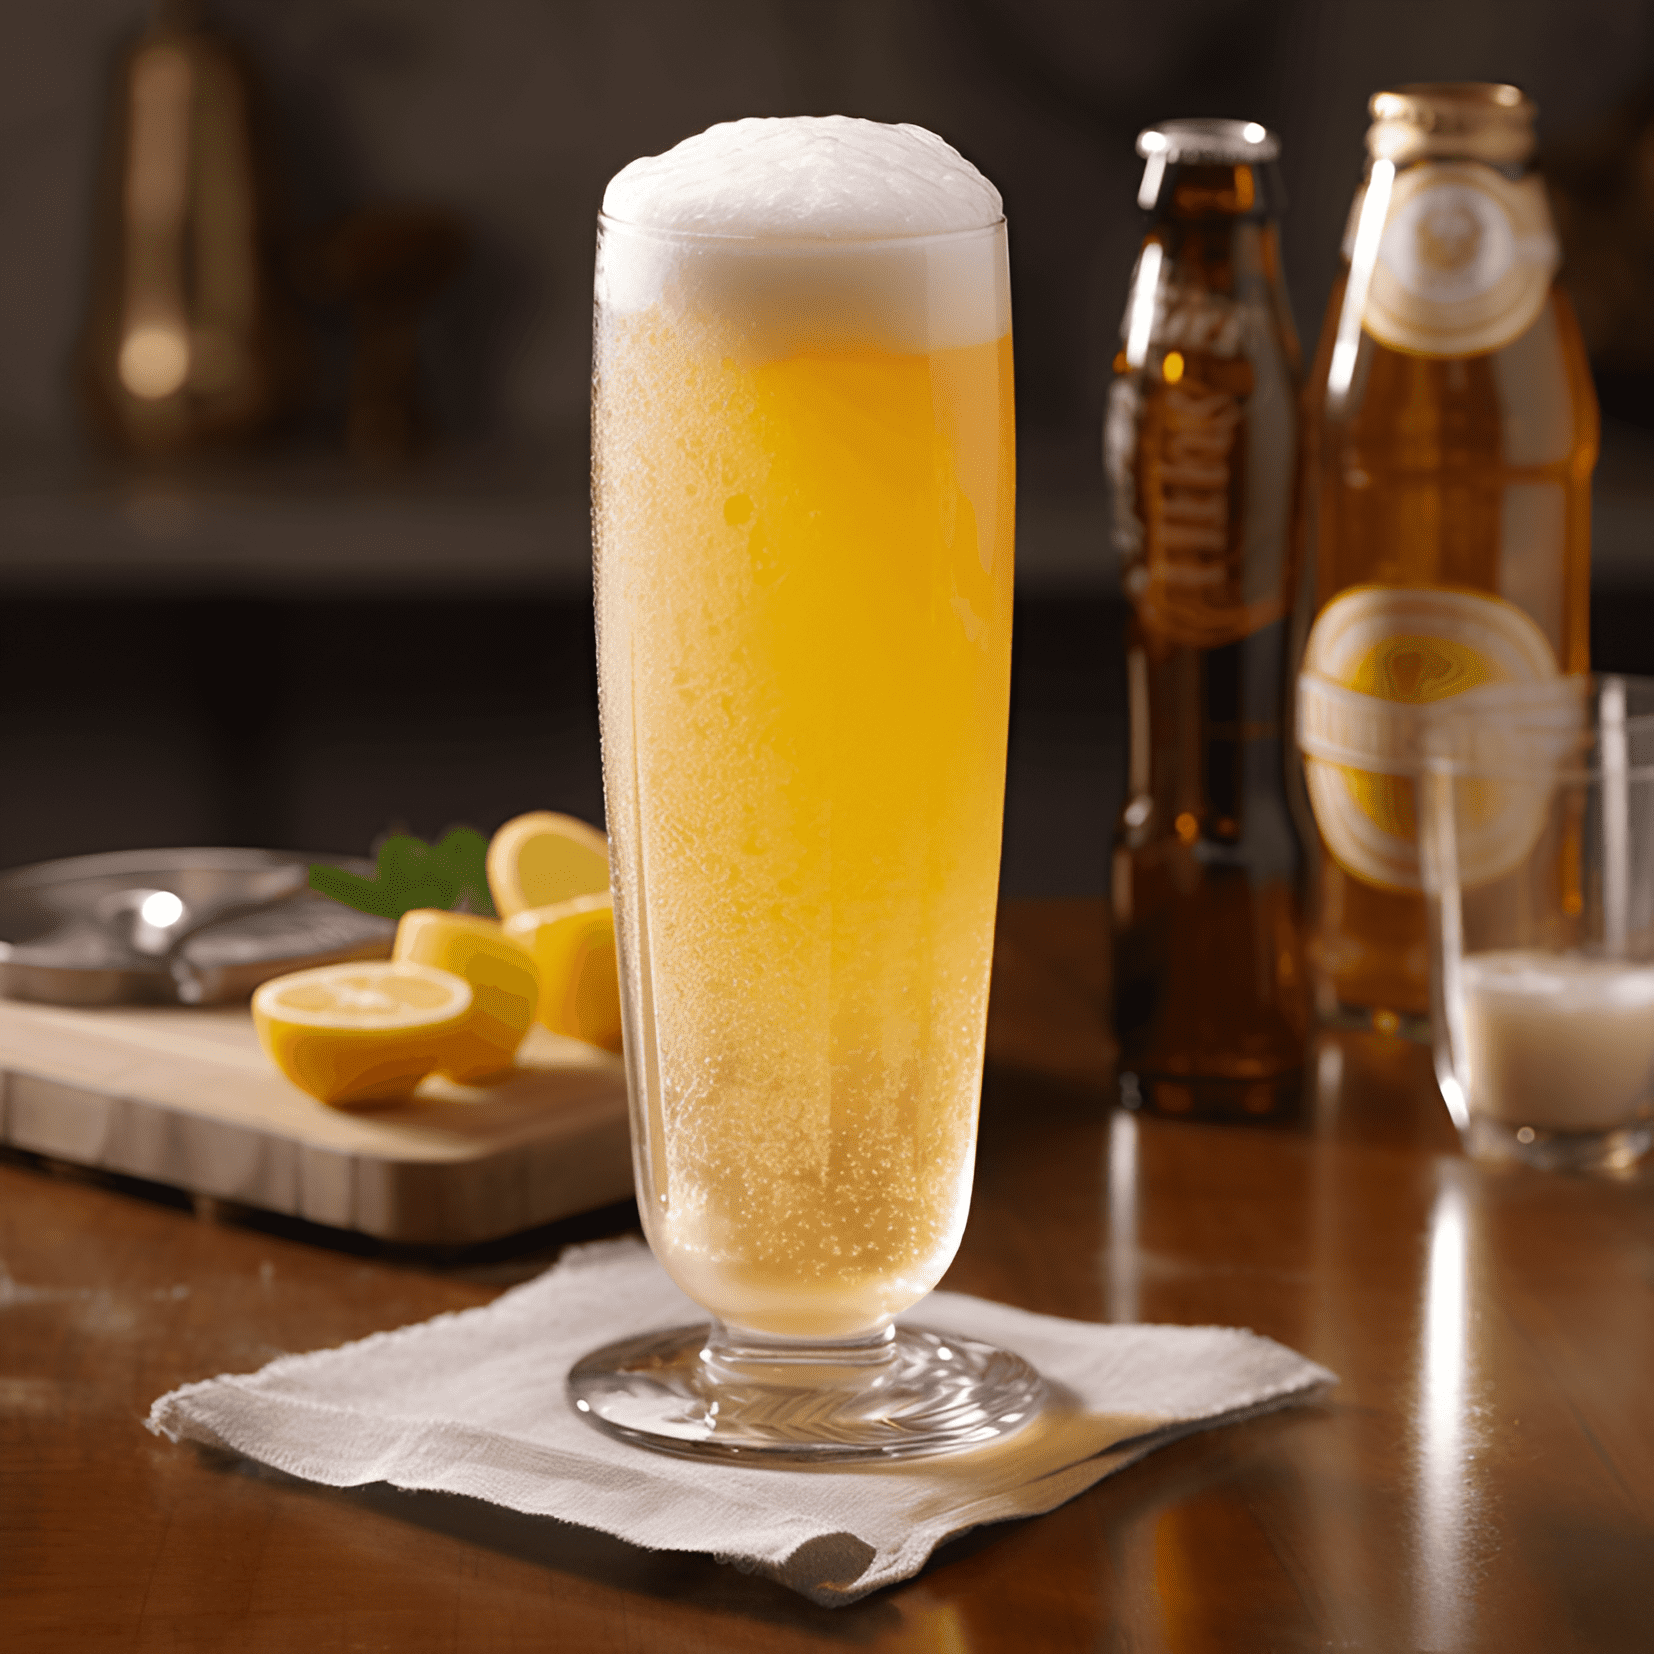 Shandy Cocktail Recipe - The Shandy cocktail is a perfect balance of sweet, tangy, and refreshing flavors. The lemonade adds a bright citrusy note, while the beer provides a malty, slightly bitter backbone. The overall taste is light, crisp, and effervescent.